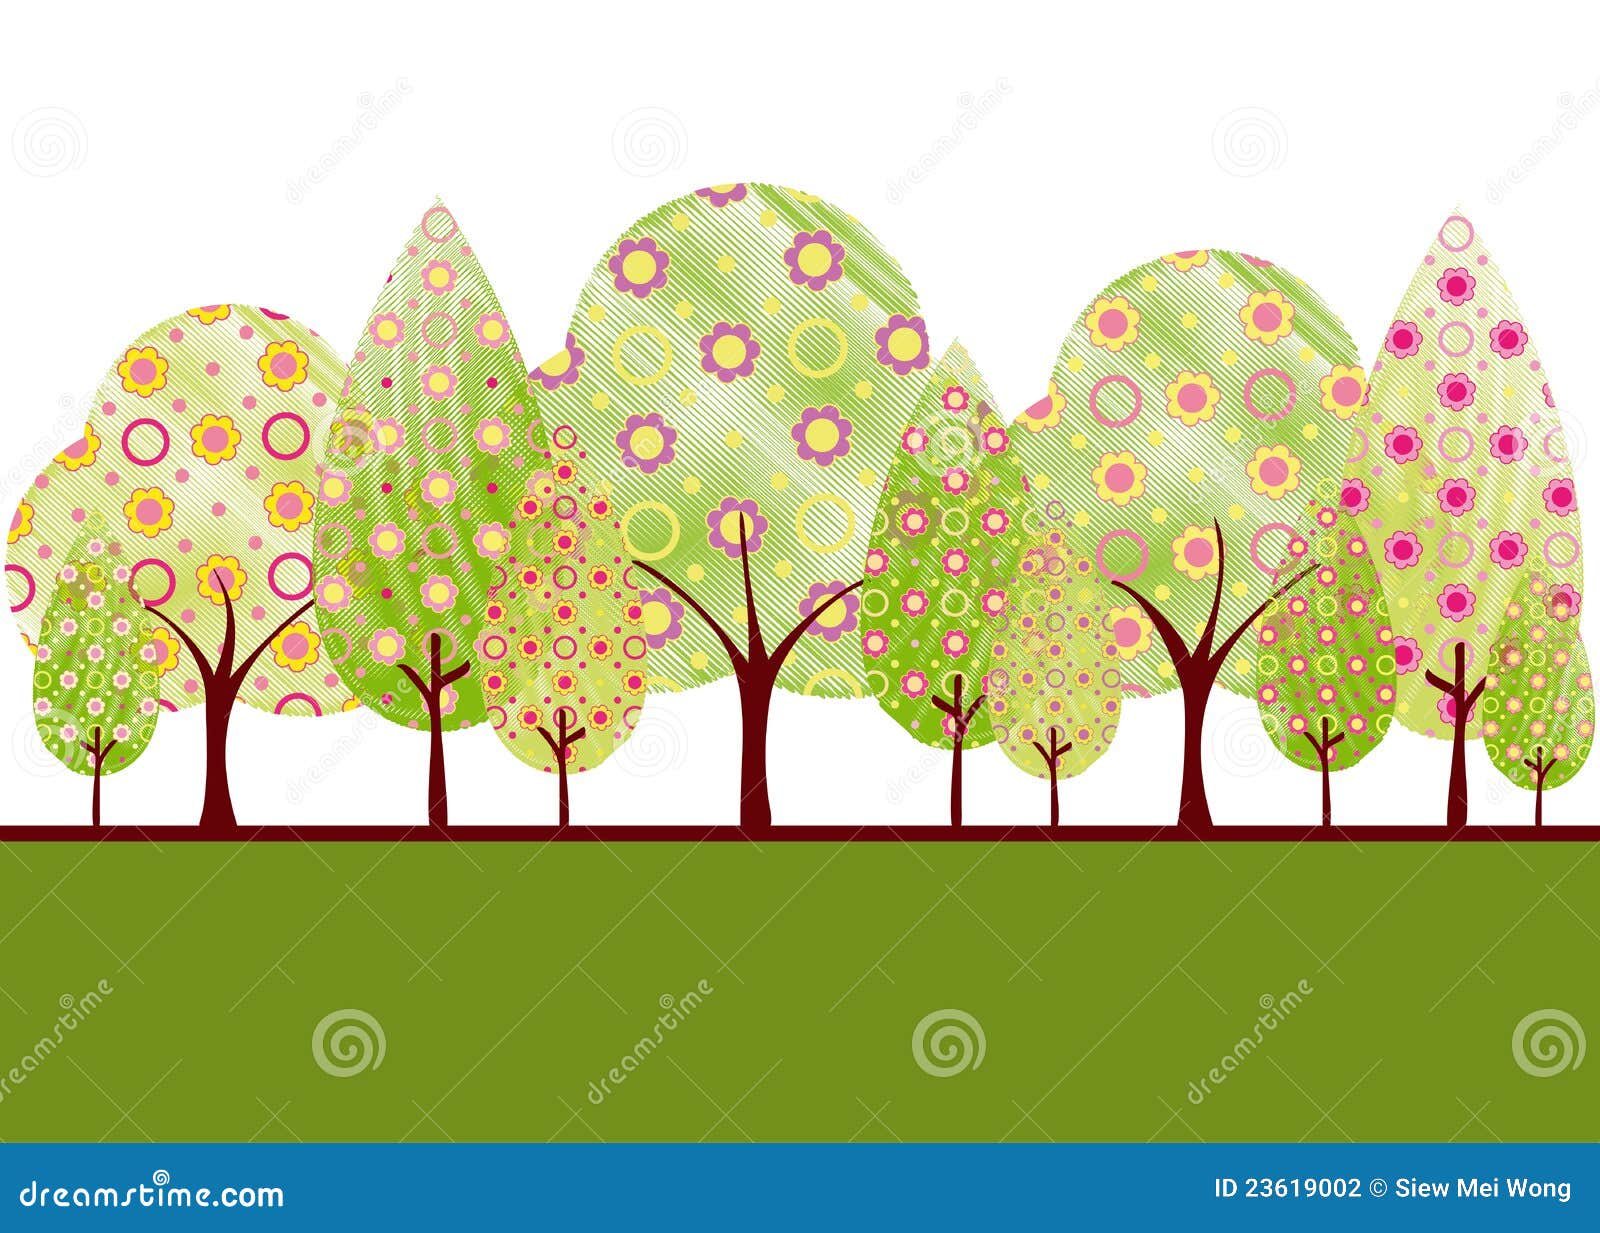 Abstract springtime tree stock vector. Illustration of brown - 23619002